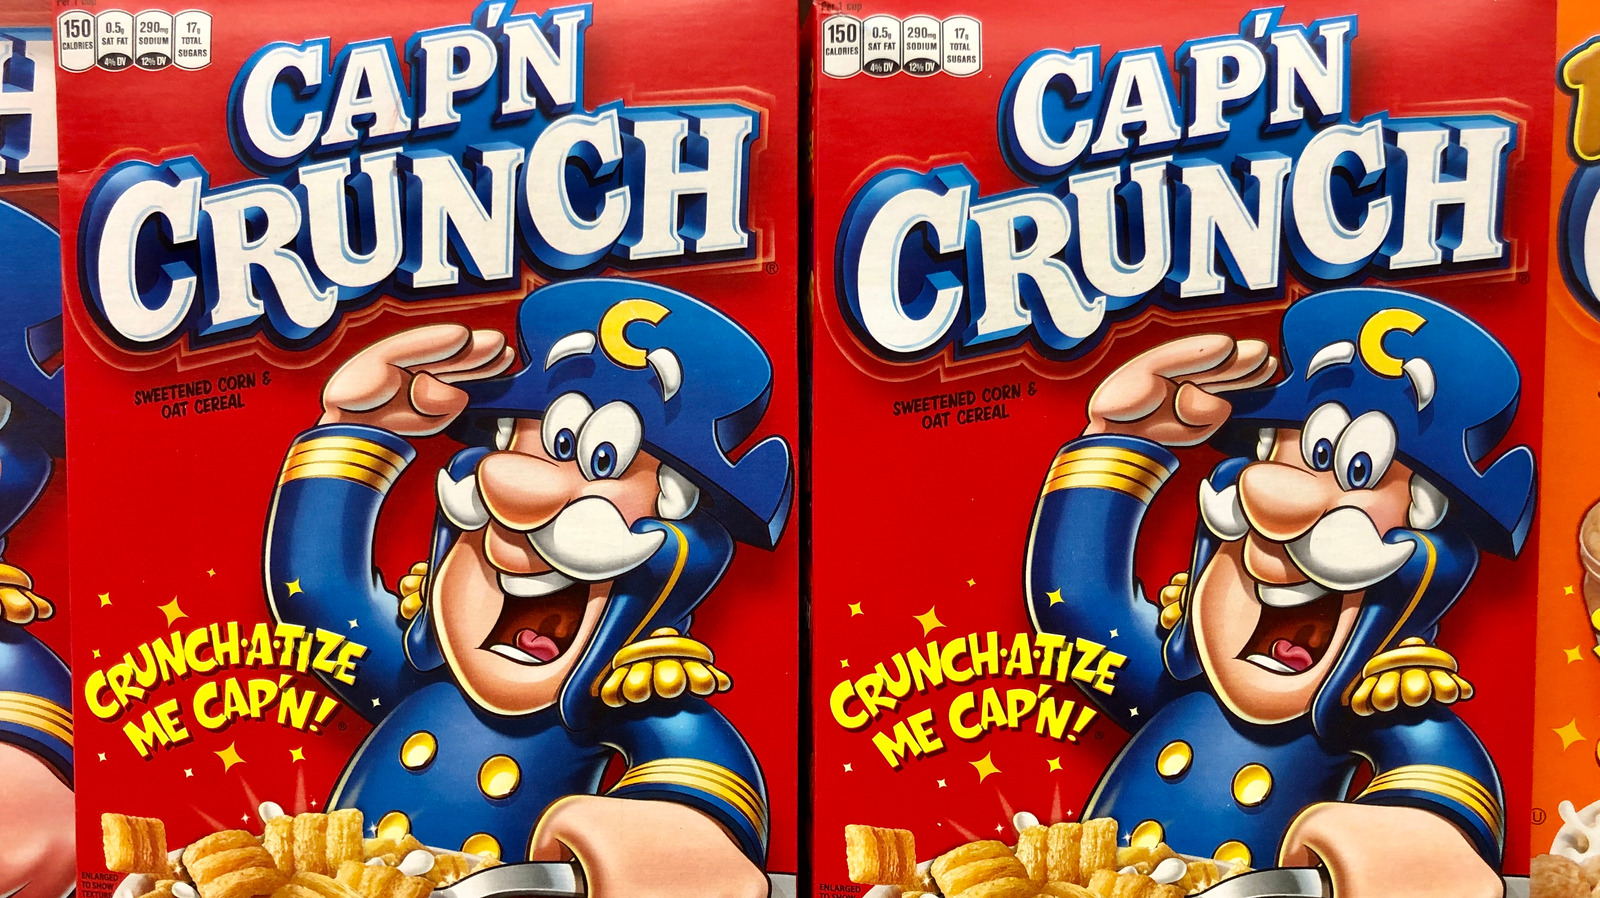 What Exactly Is The Flavor Of Cap’n Crunch Cereal? – The Daily Meal